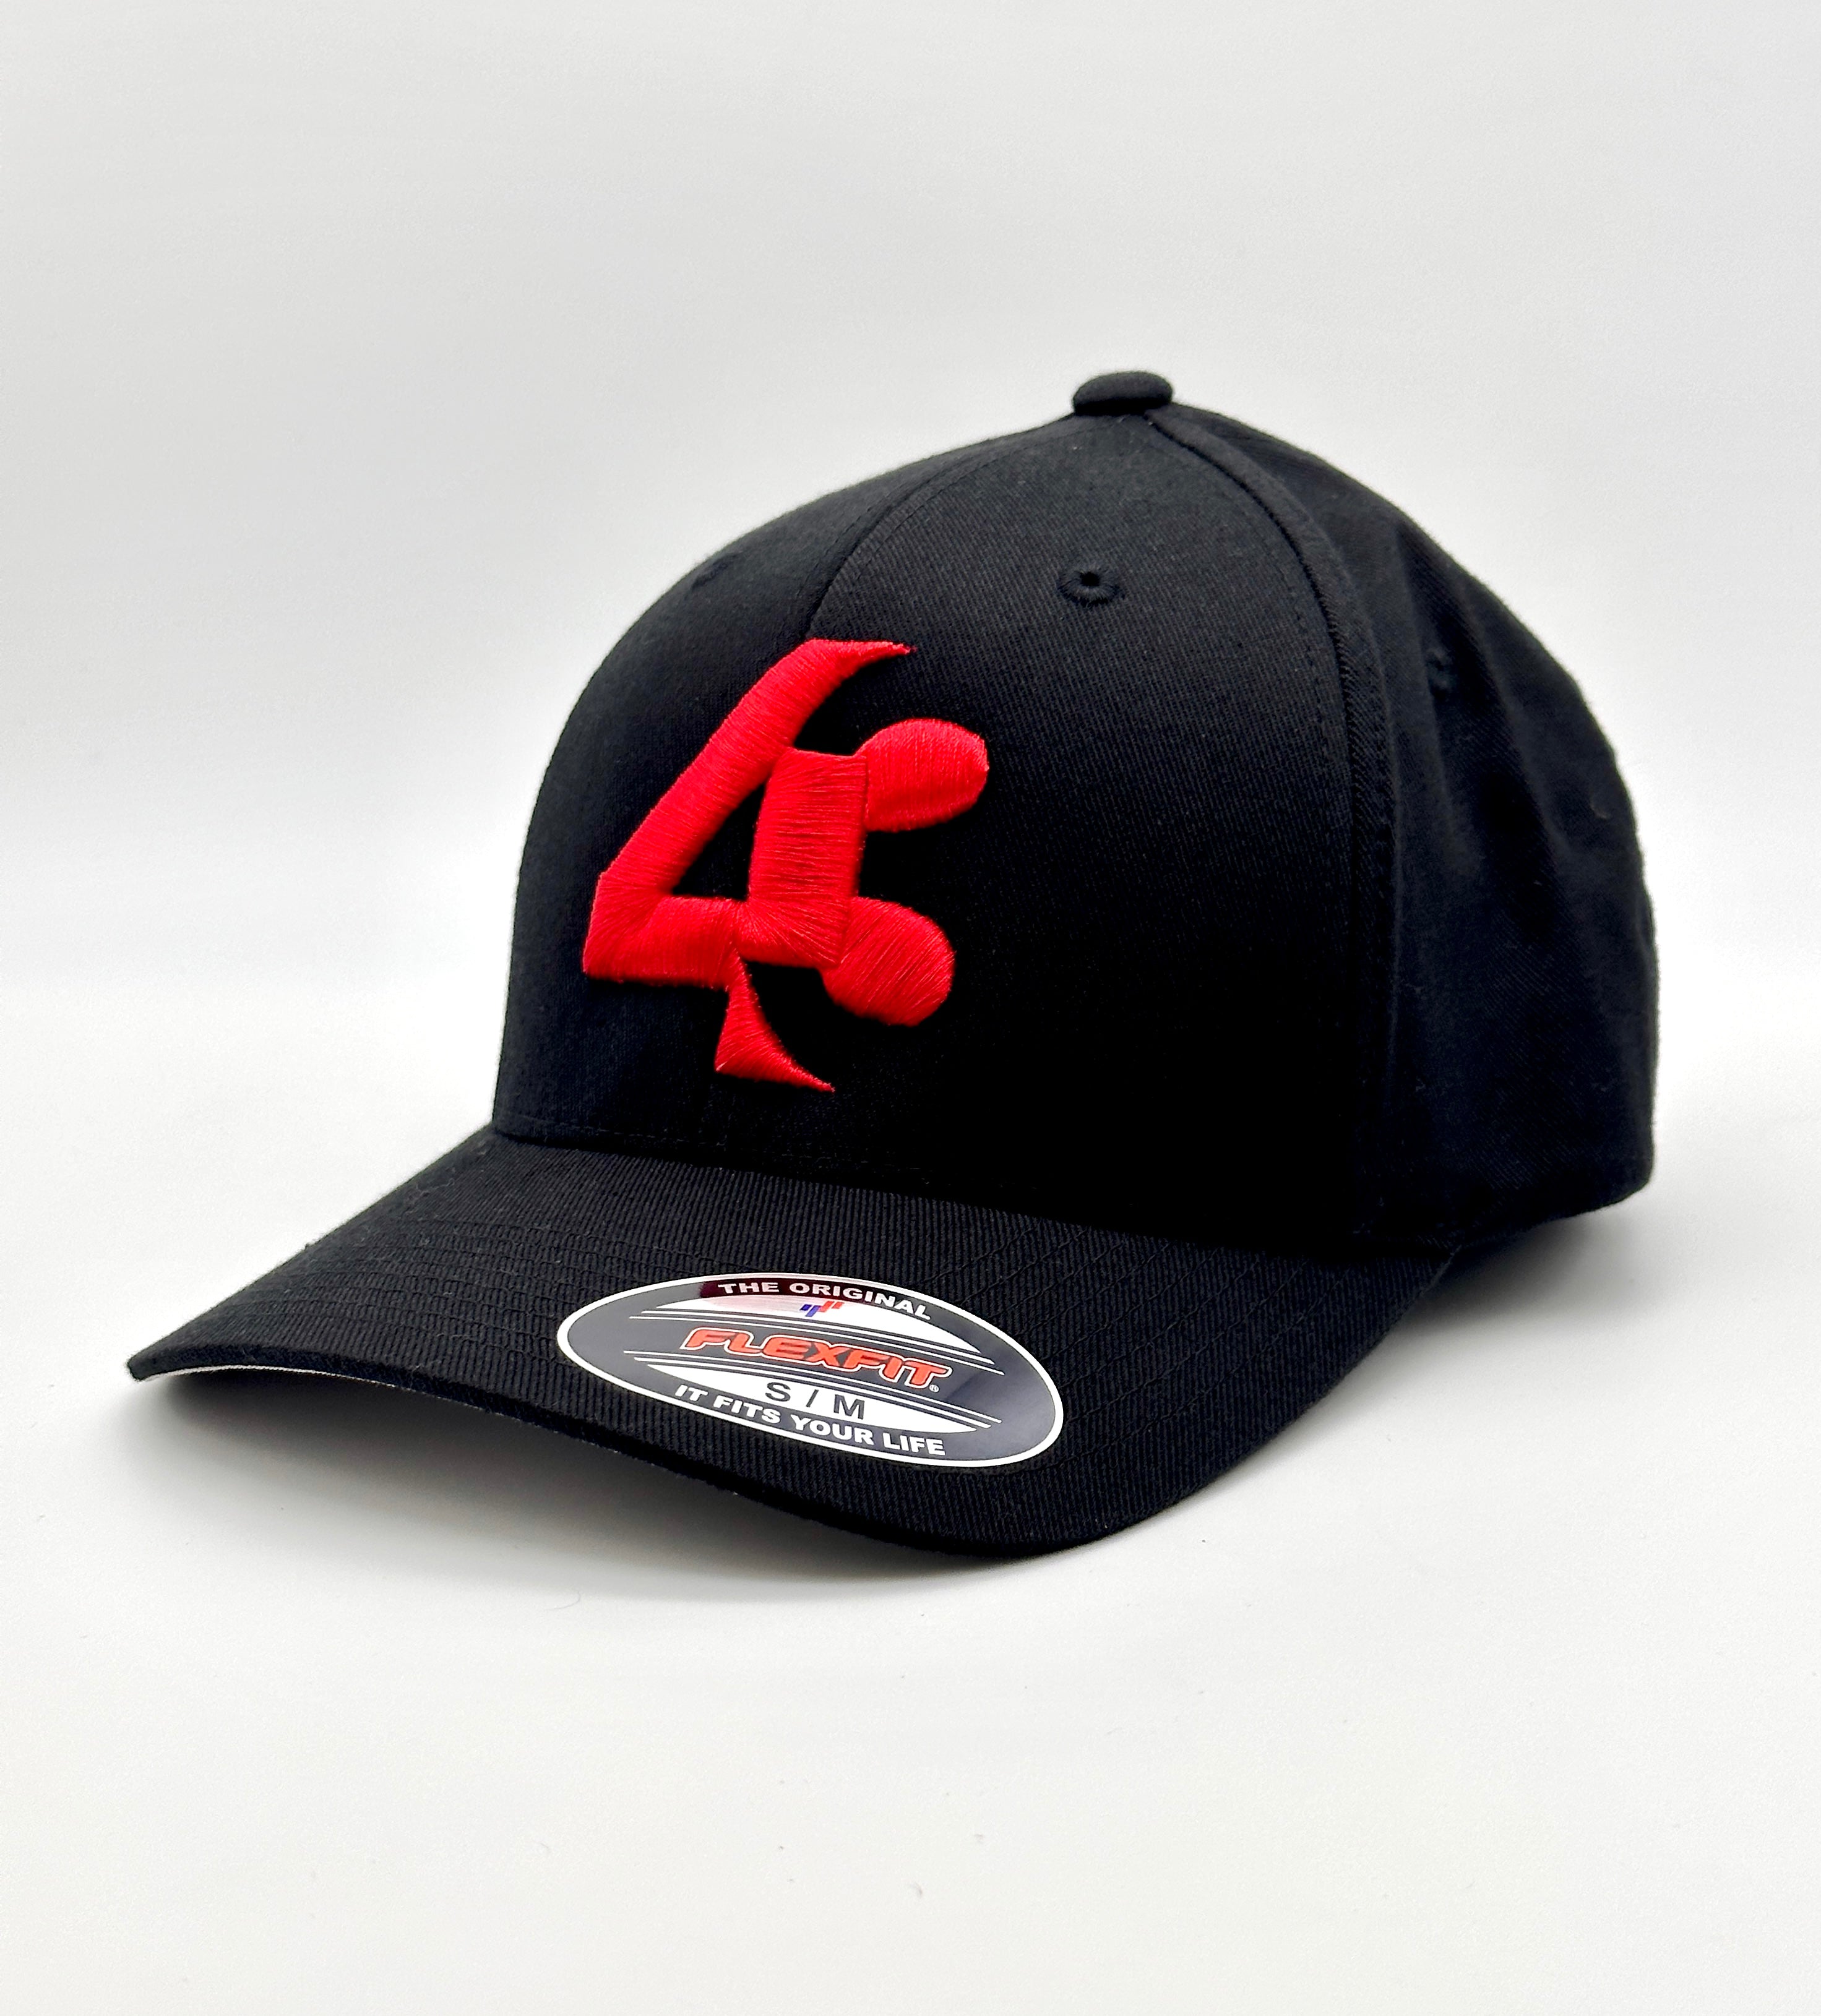 43 USA Fitted with FortyThree™ Black Flexfit® – red emblem